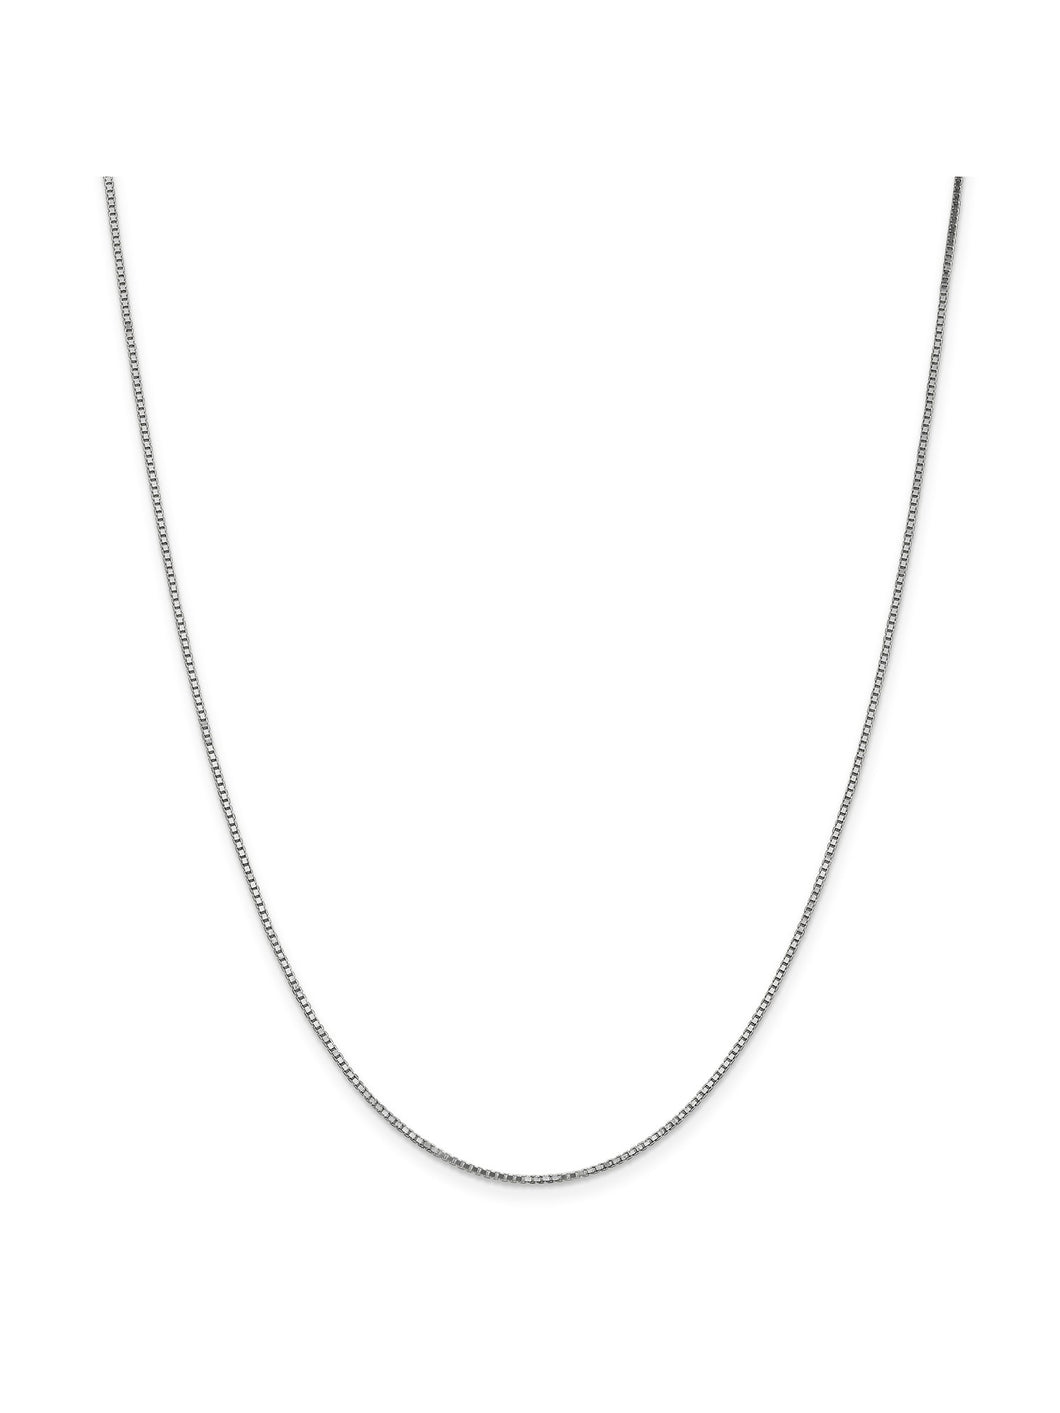 14k White Gold 1.1mm Wide Box Chain Necklace